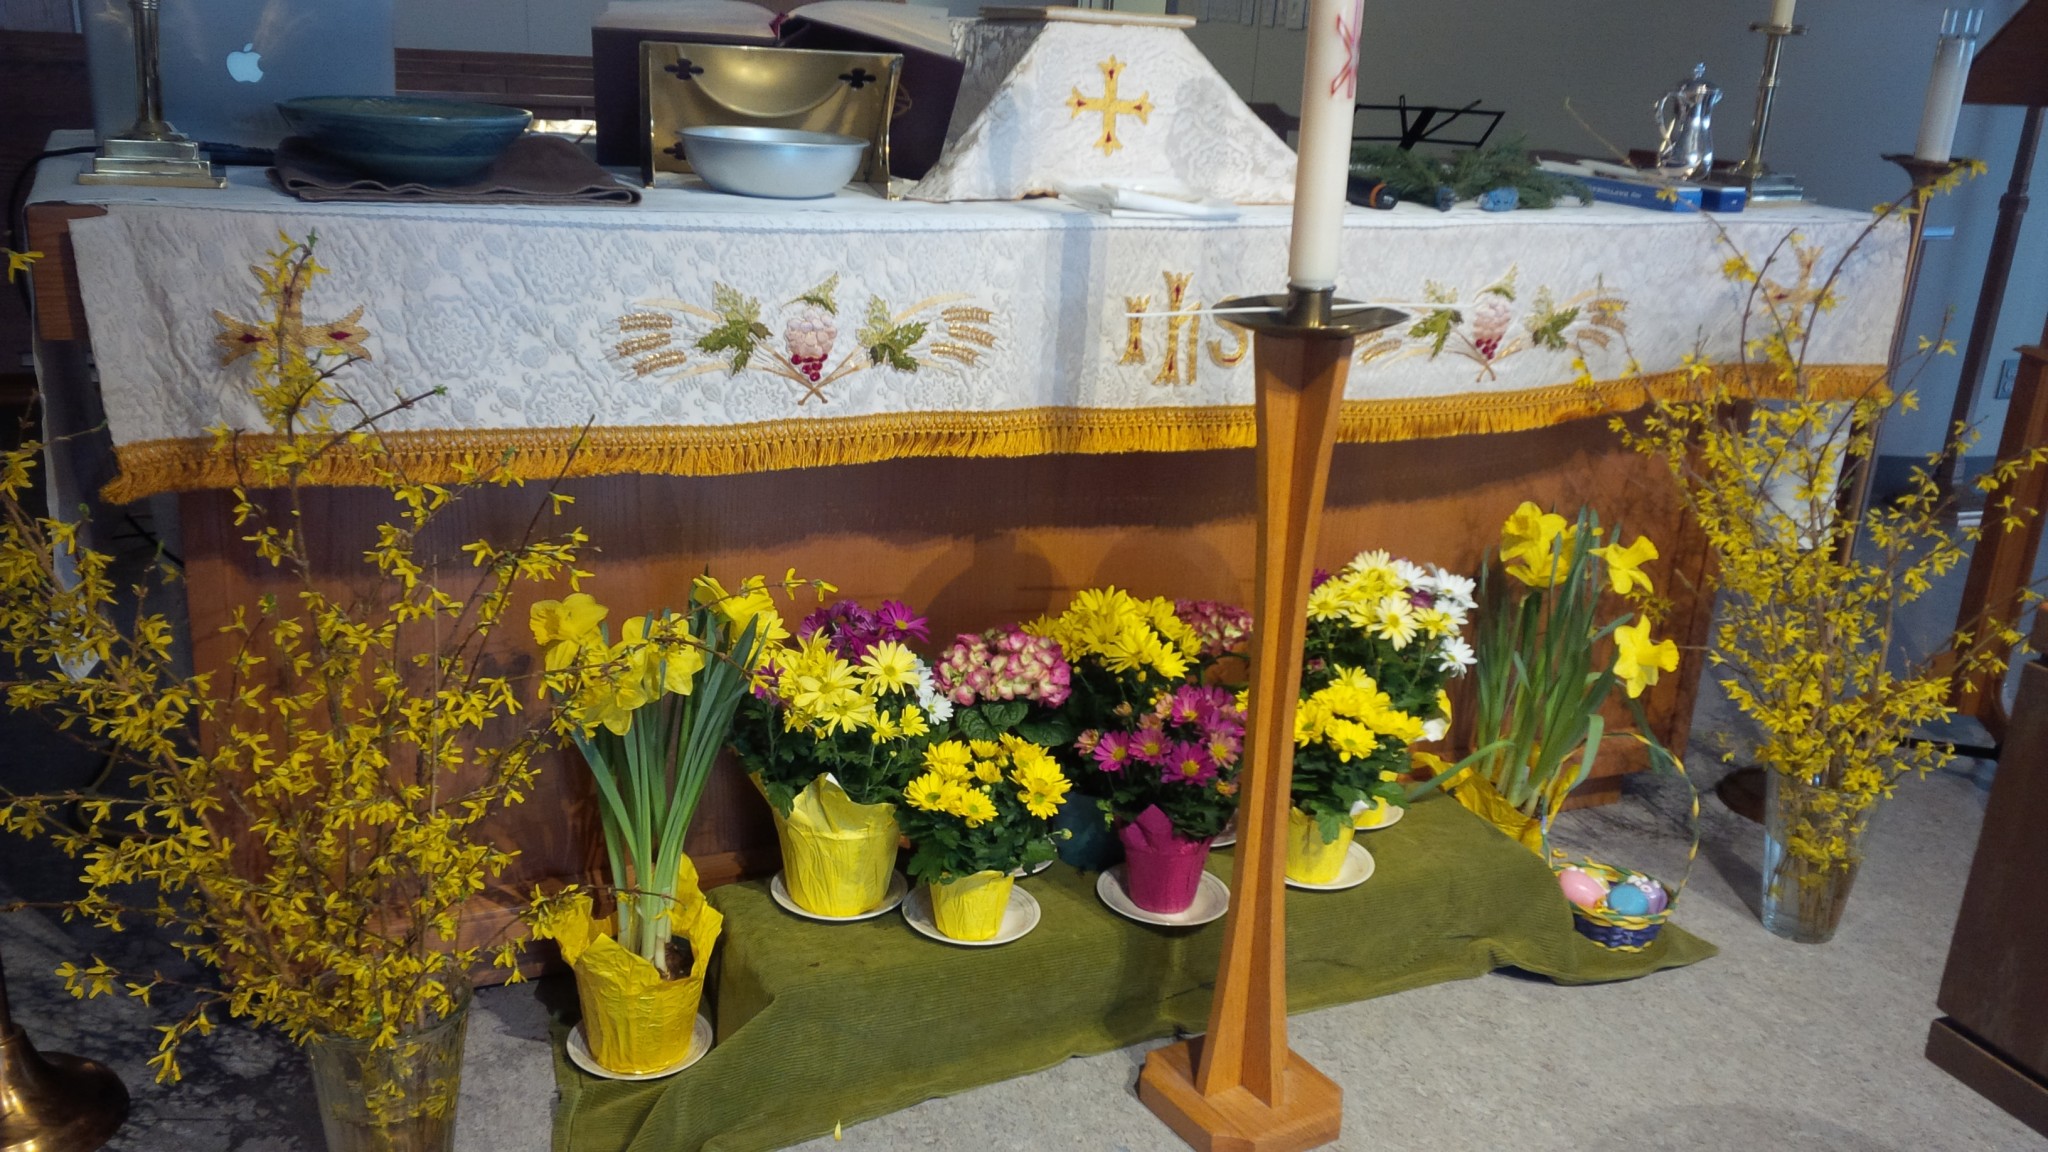 Fifth Sunday of Easter – May 10, 2020